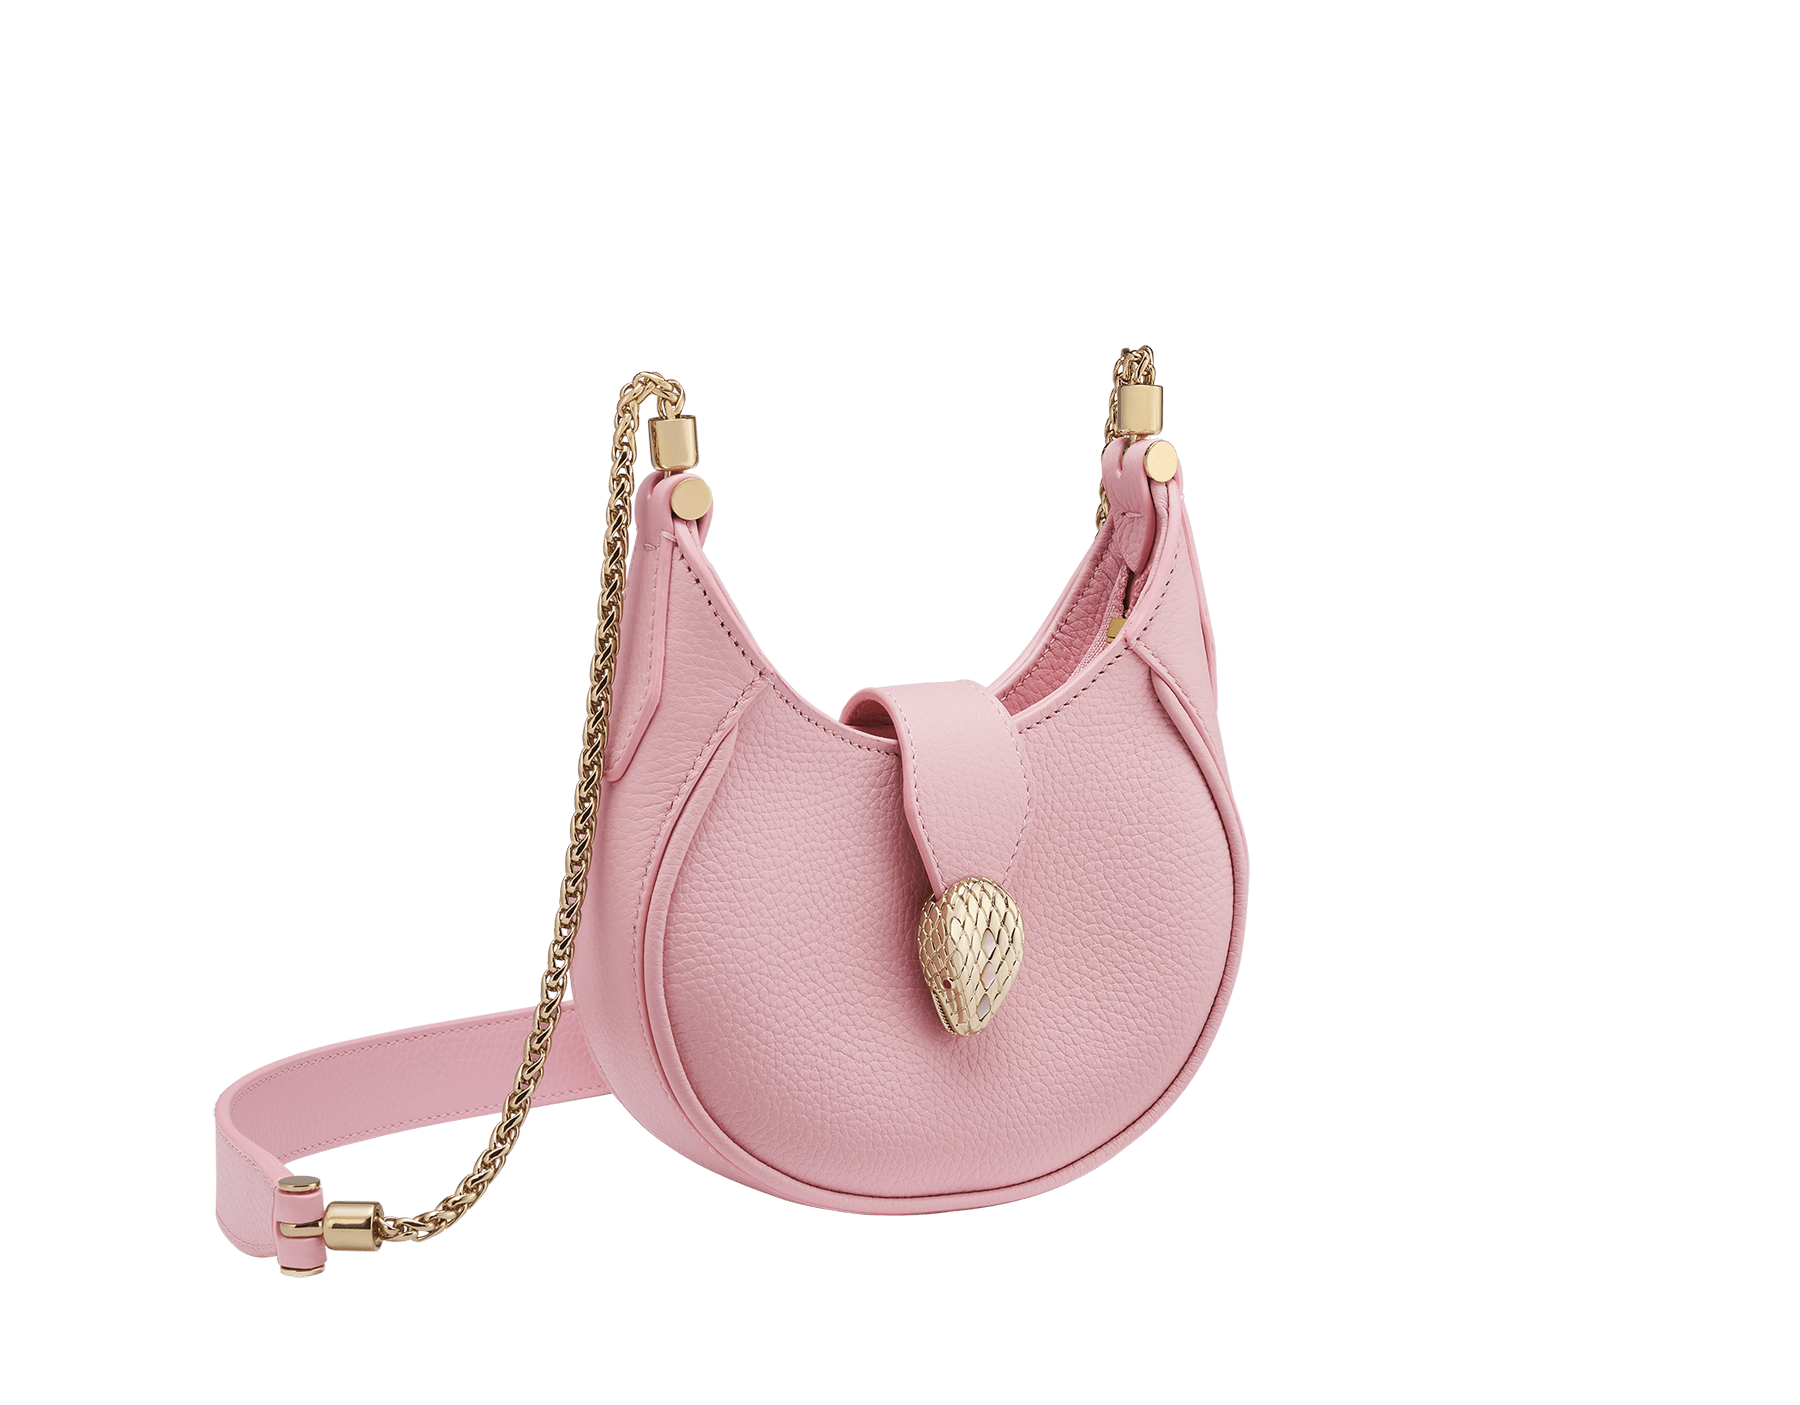 Serpenti Ellipse micro bag in soft, drummed, flash diamond white calf leather with taffy quartz pink grosgrain lining. Captivating snakehead closure in gold-plated brass embellished with mother-of-pearl scales and red enamel eyes, leather tab with magnet, and zippered fastening. SEA-MICROHOBOc image 1